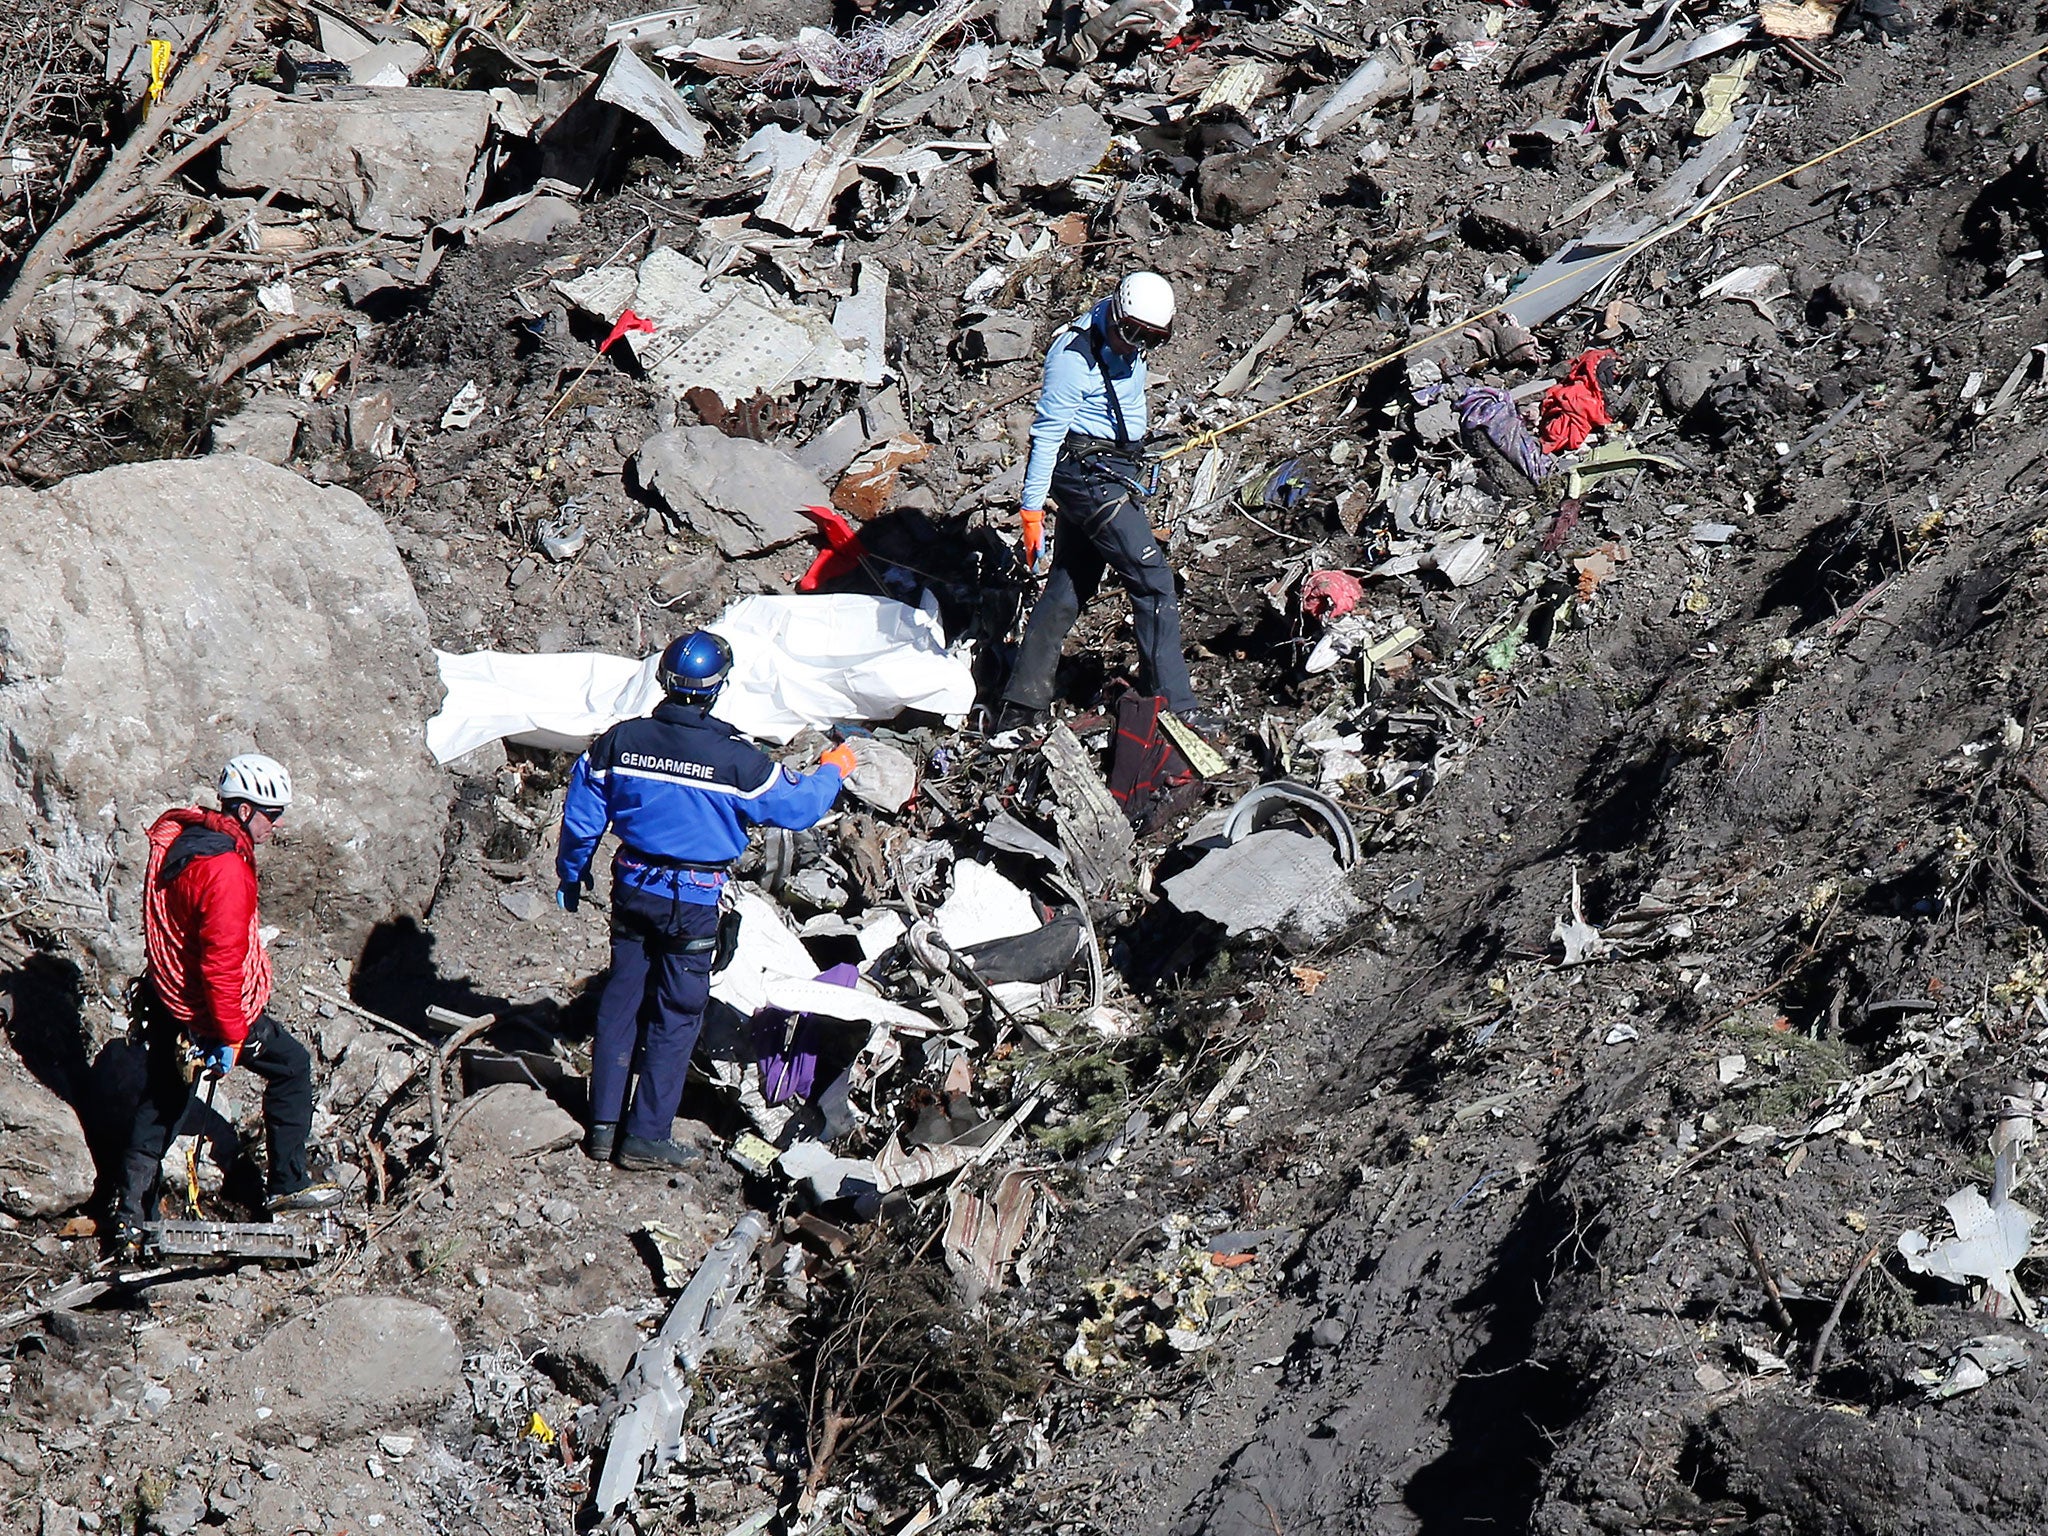 Search and rescue workers make their way through debris at the crash site of the Germanwings Airbus A320 that crashed in the French Alps, above the town of Seyne-les-Alpes, southeastern France